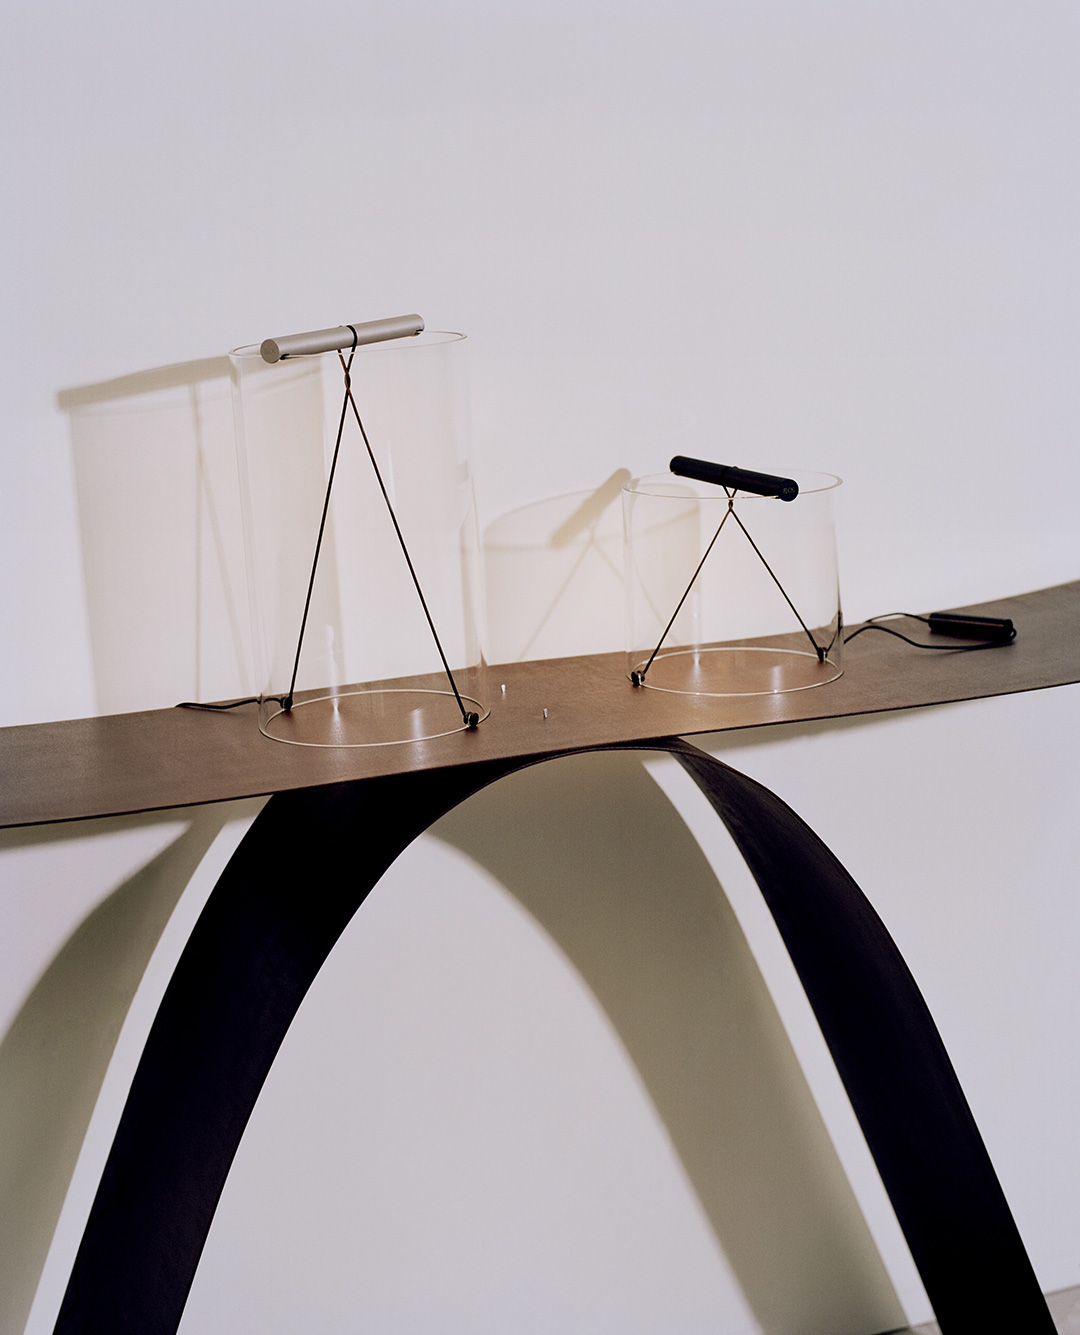 The To-Tie lamps, placed on a table